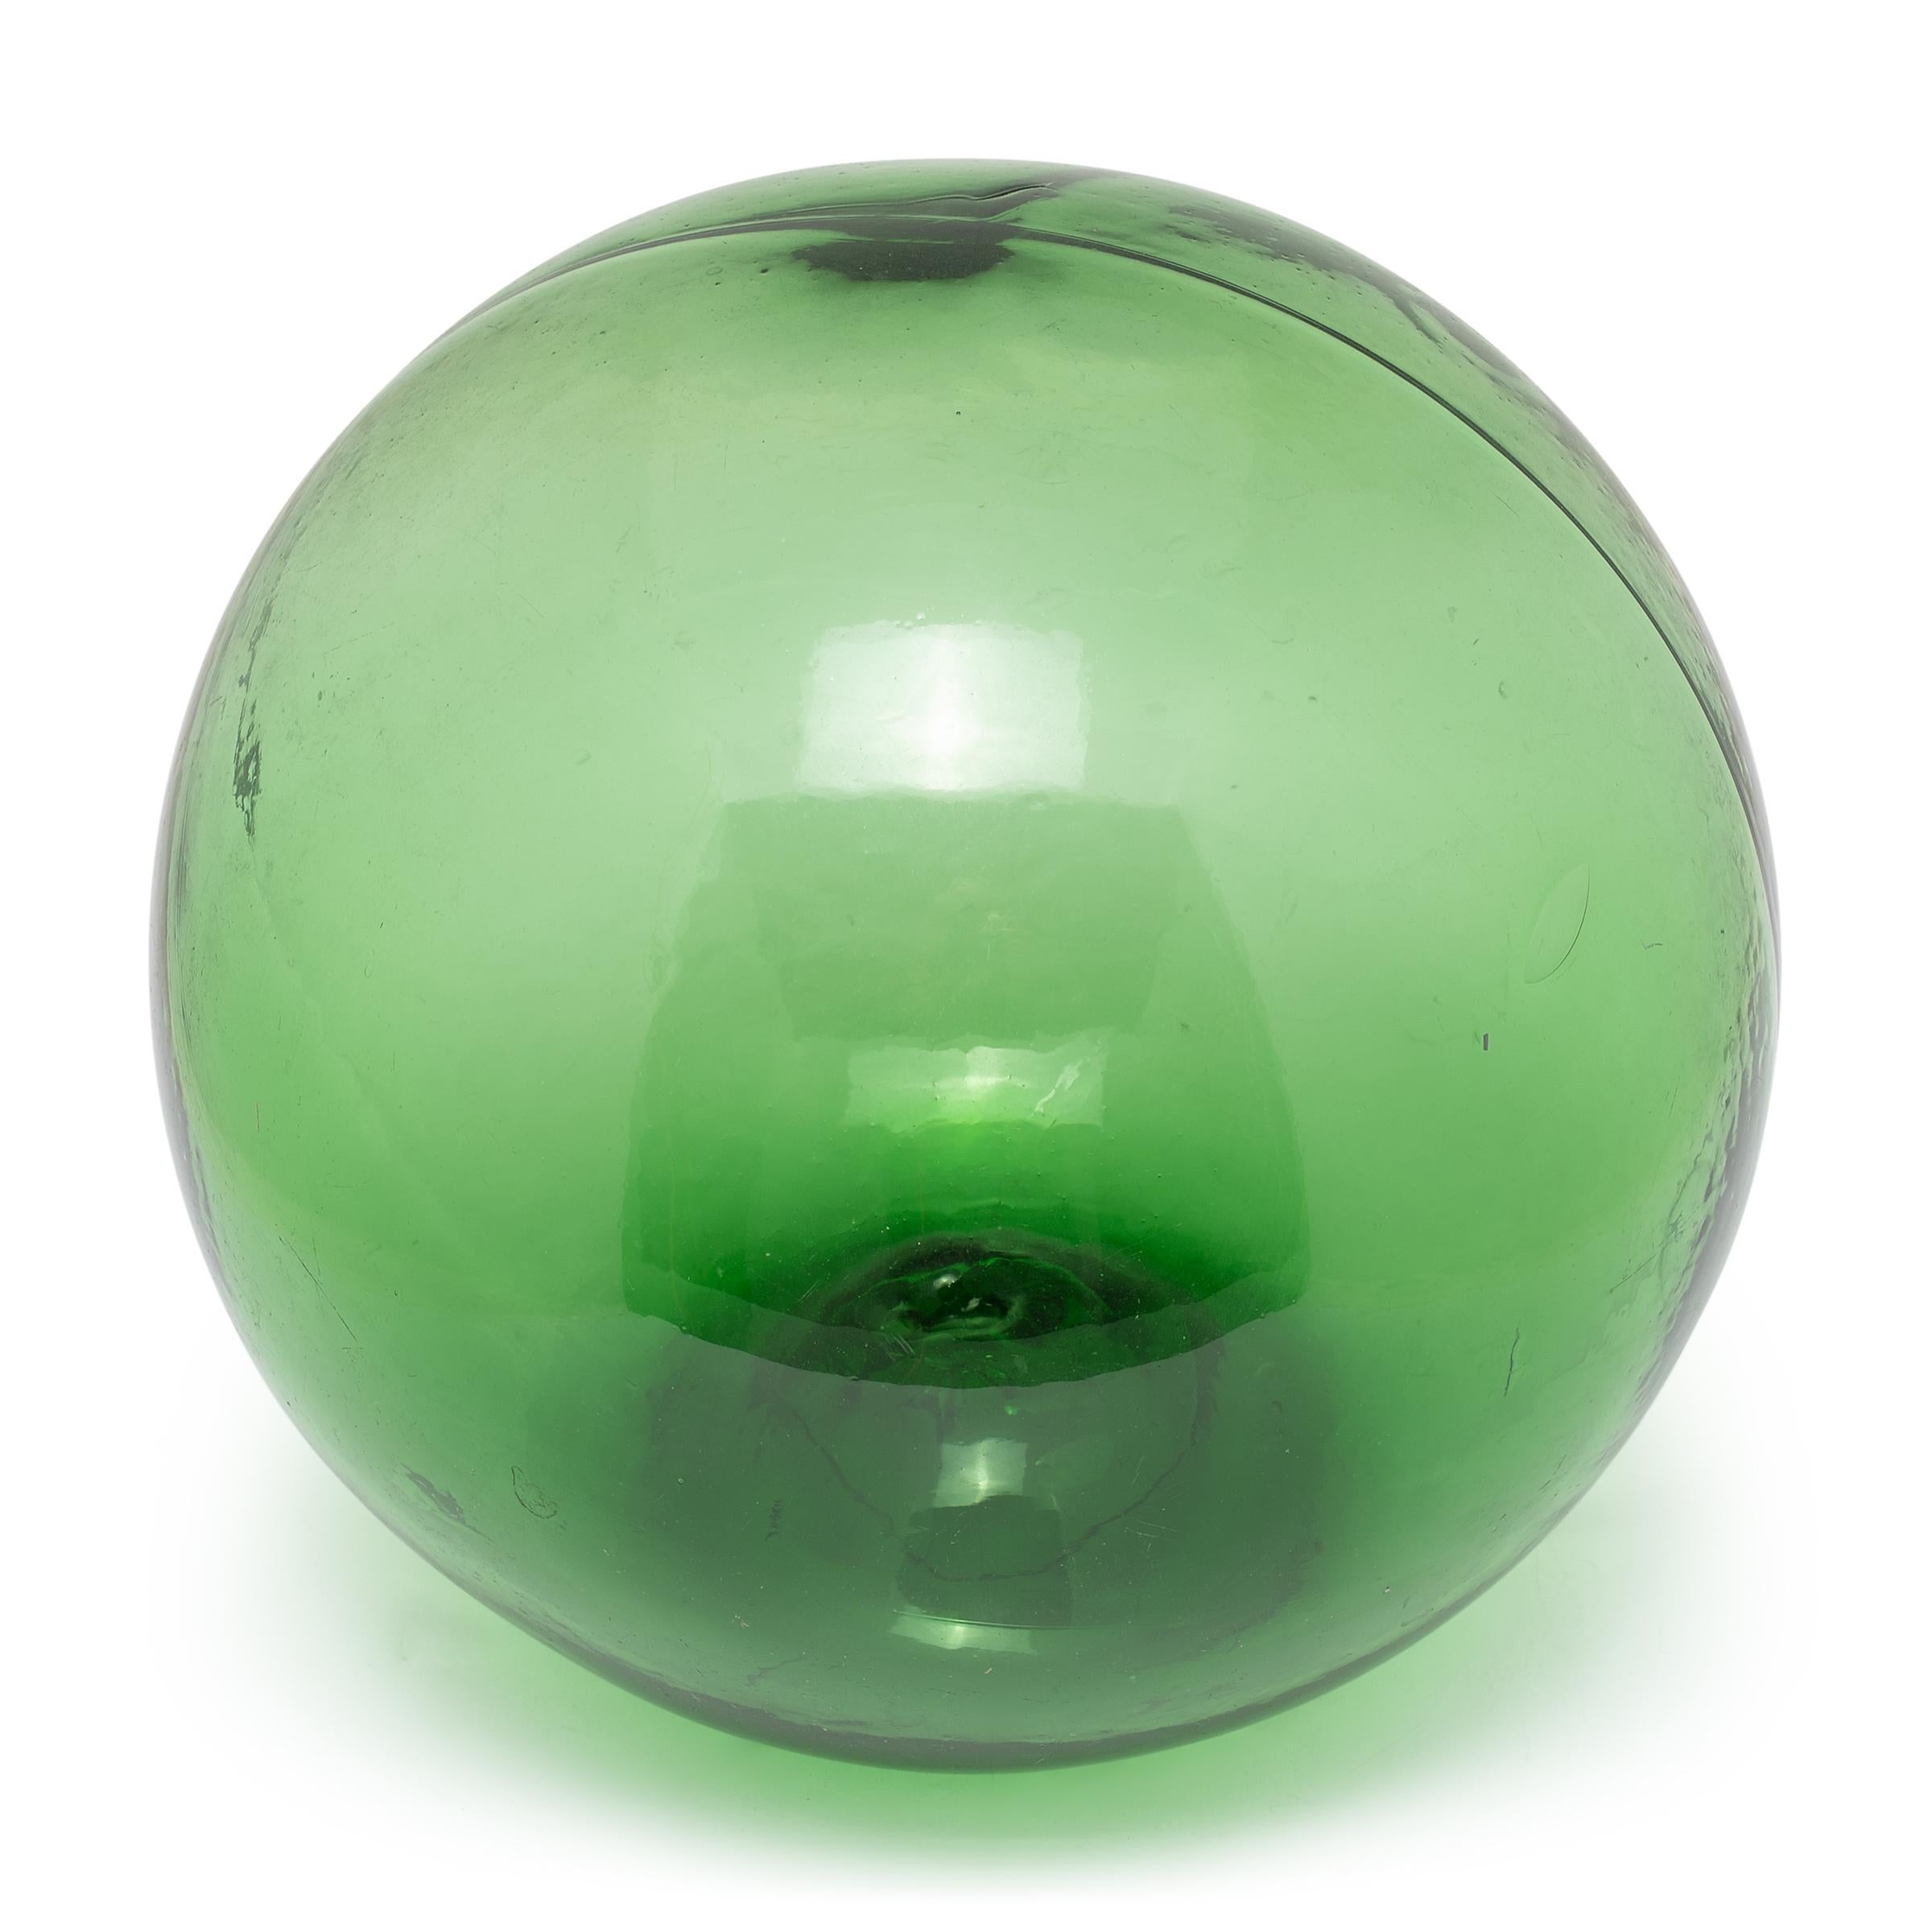 This beautiful green sphere is an early 20th century glass float used by Japanese fishermen to keep their fishing nets or droplines afloat in the ocean. The hollow float would have been encased by a rope netting and used just like a modern buoy.